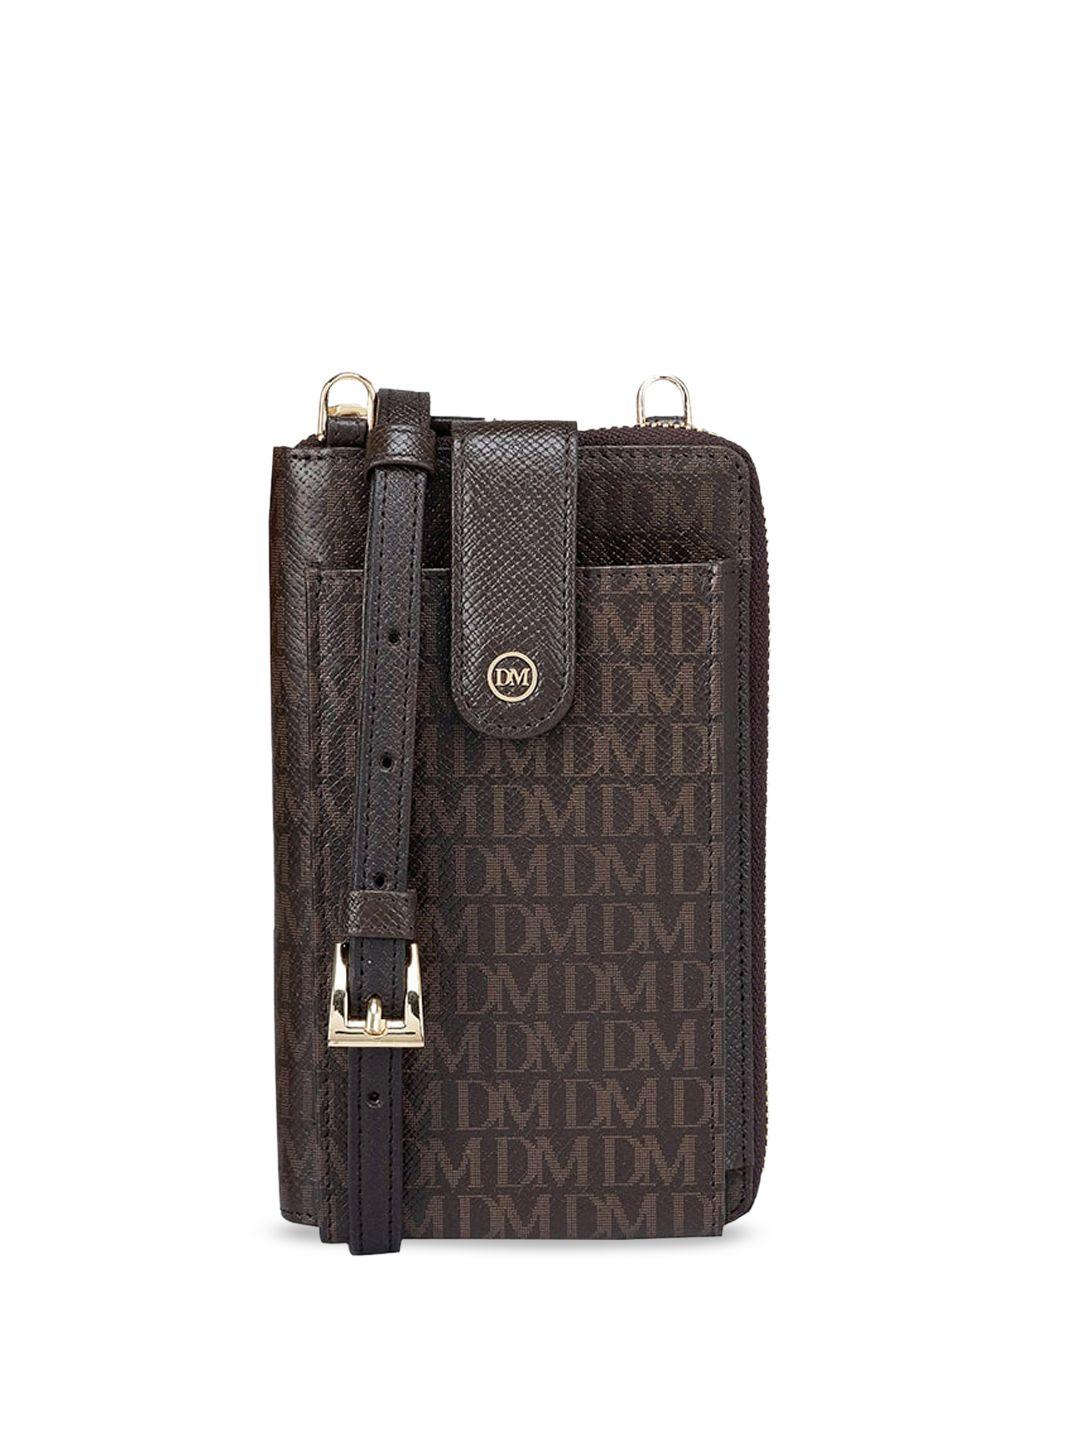 da milano men textured leather mobile pouch with sling strap